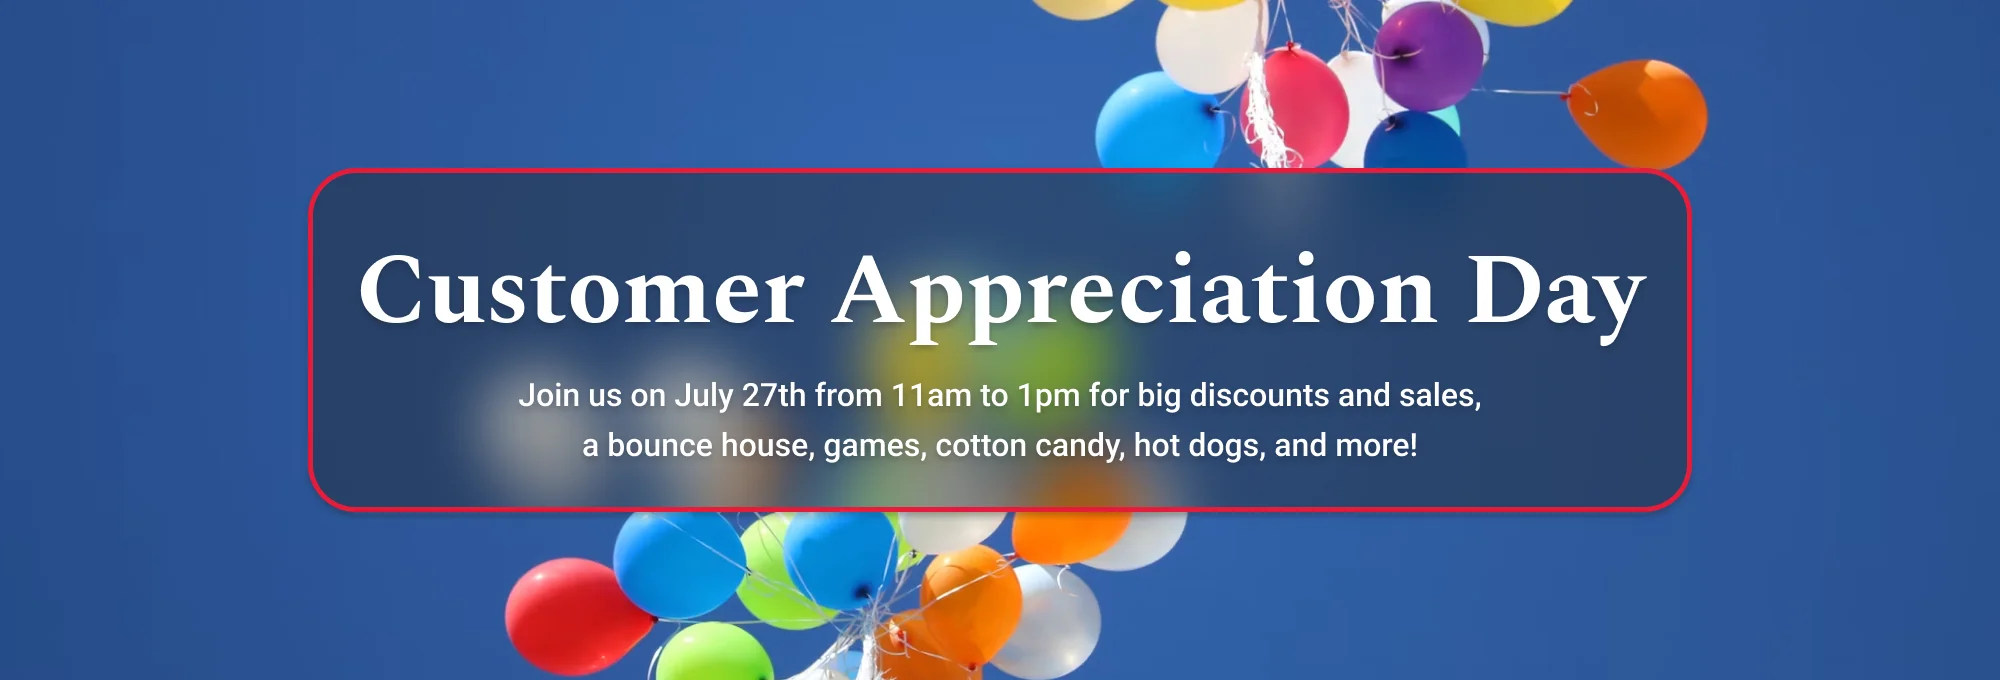 Join Cardinal Flooring and Supply for their Customer Appreciation Day on July 27th!